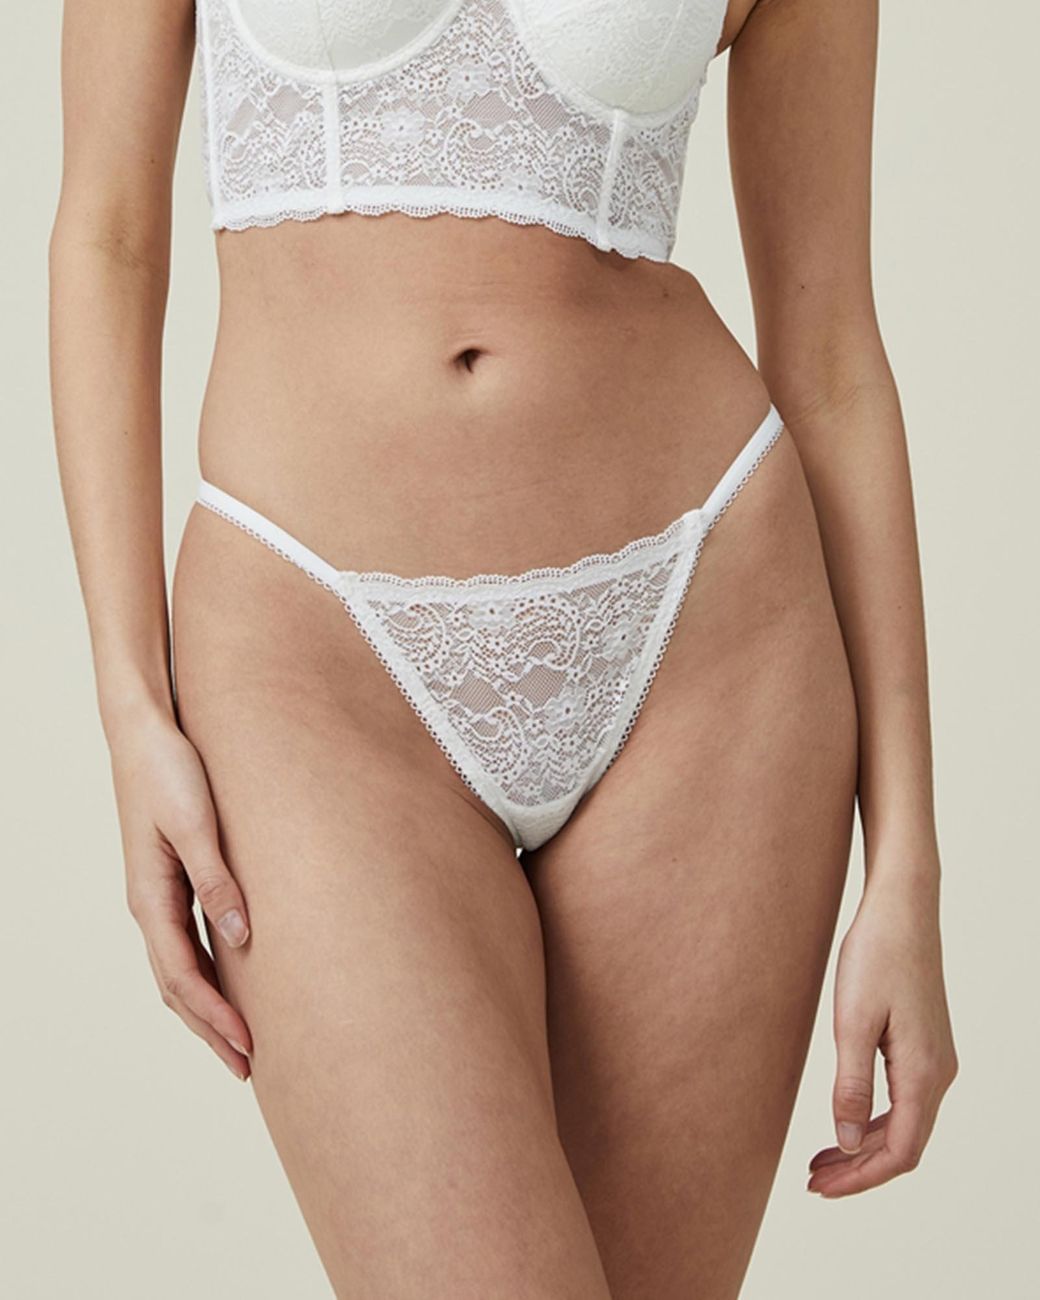 Cotton On Body Ultimate Comfort Lace Tanga G String Brief in Natural | Lyst  Australia